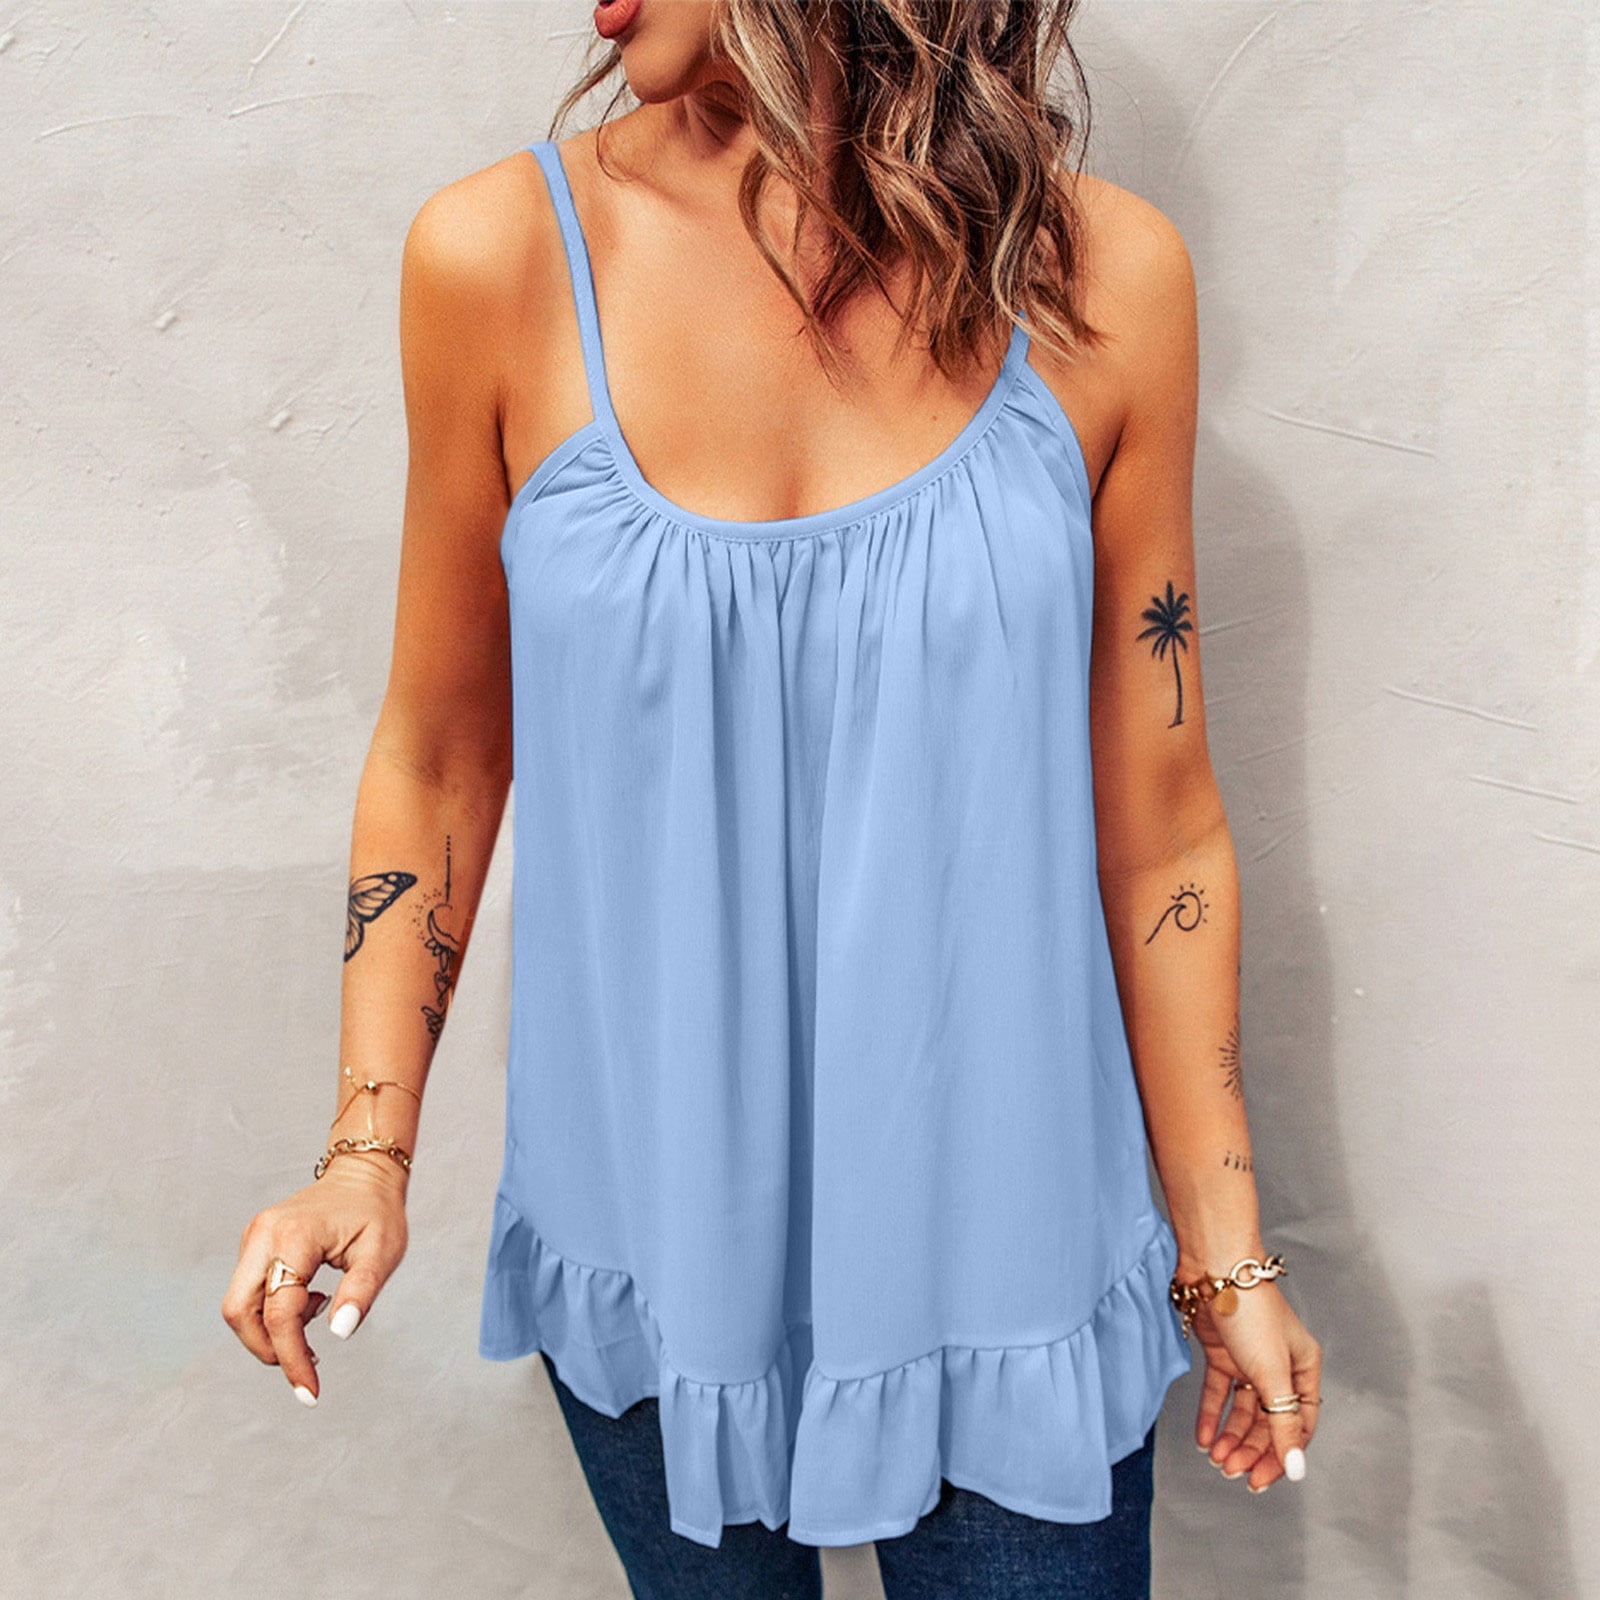 Xysaqa Plus Size Tank Tops for Womens Summer Casual Camisole Sleeveless  Pleated Flowy Tunic Tops Spaghetti Strap Loose Fit Shirt Cami S-5XL